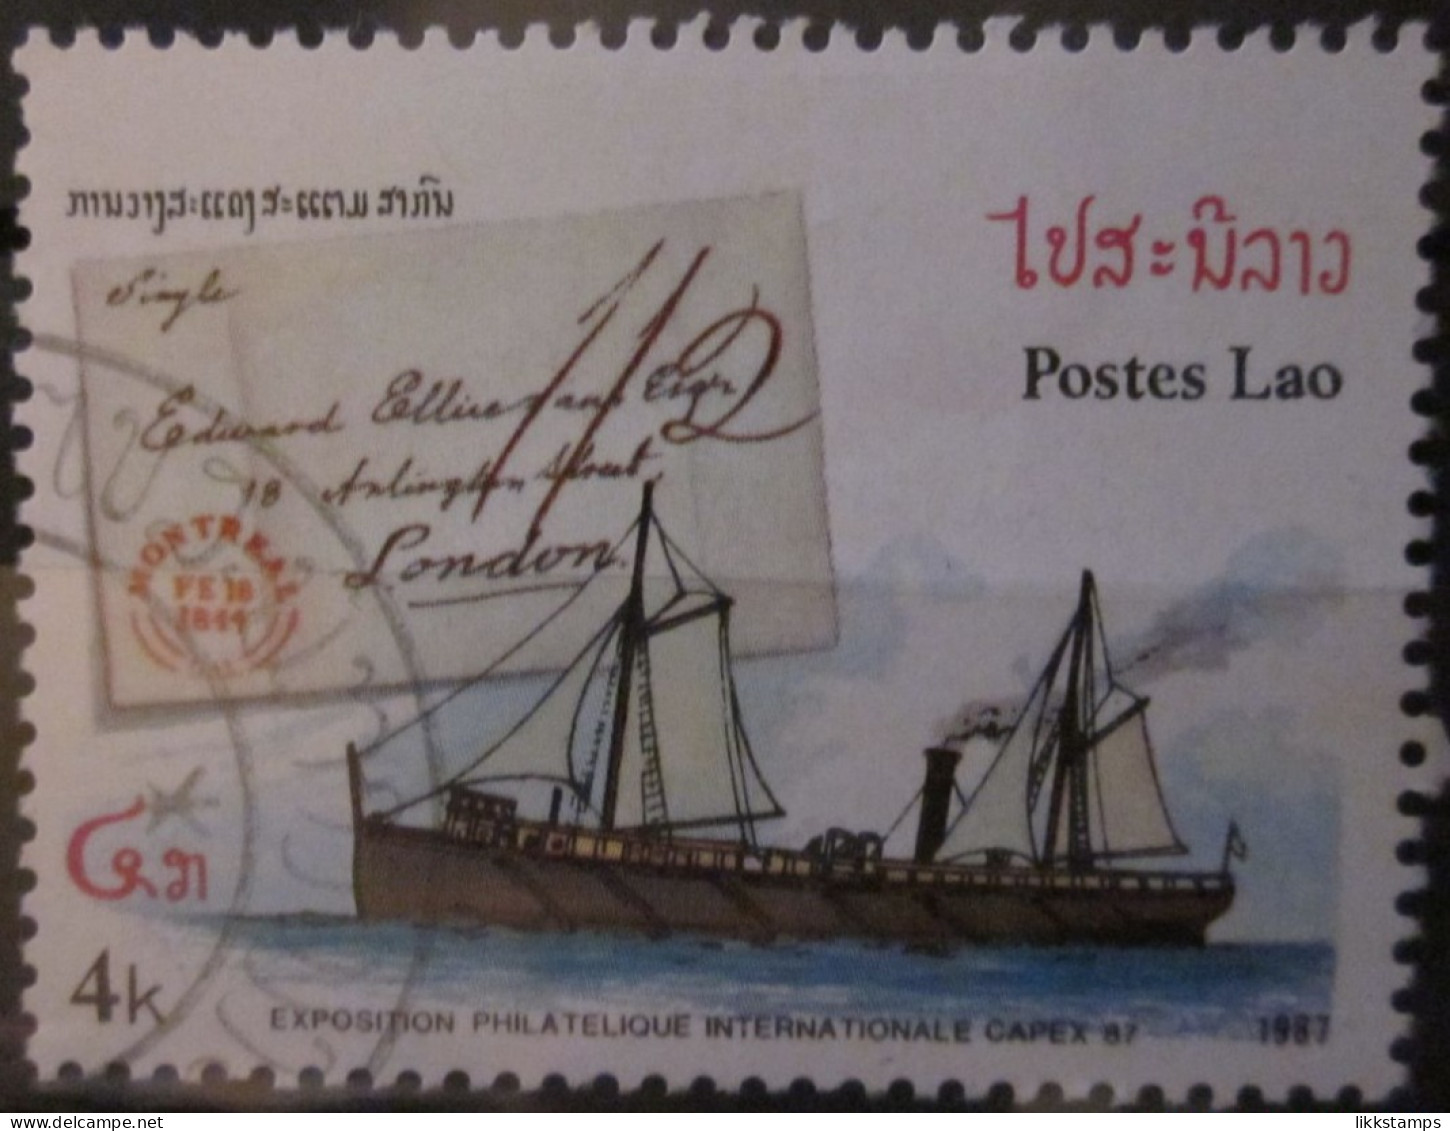 LAOS ~ 1987 ~ S.G. 985, ~ SHIPS AND COVERS. ~ VFU #03432 - Laos